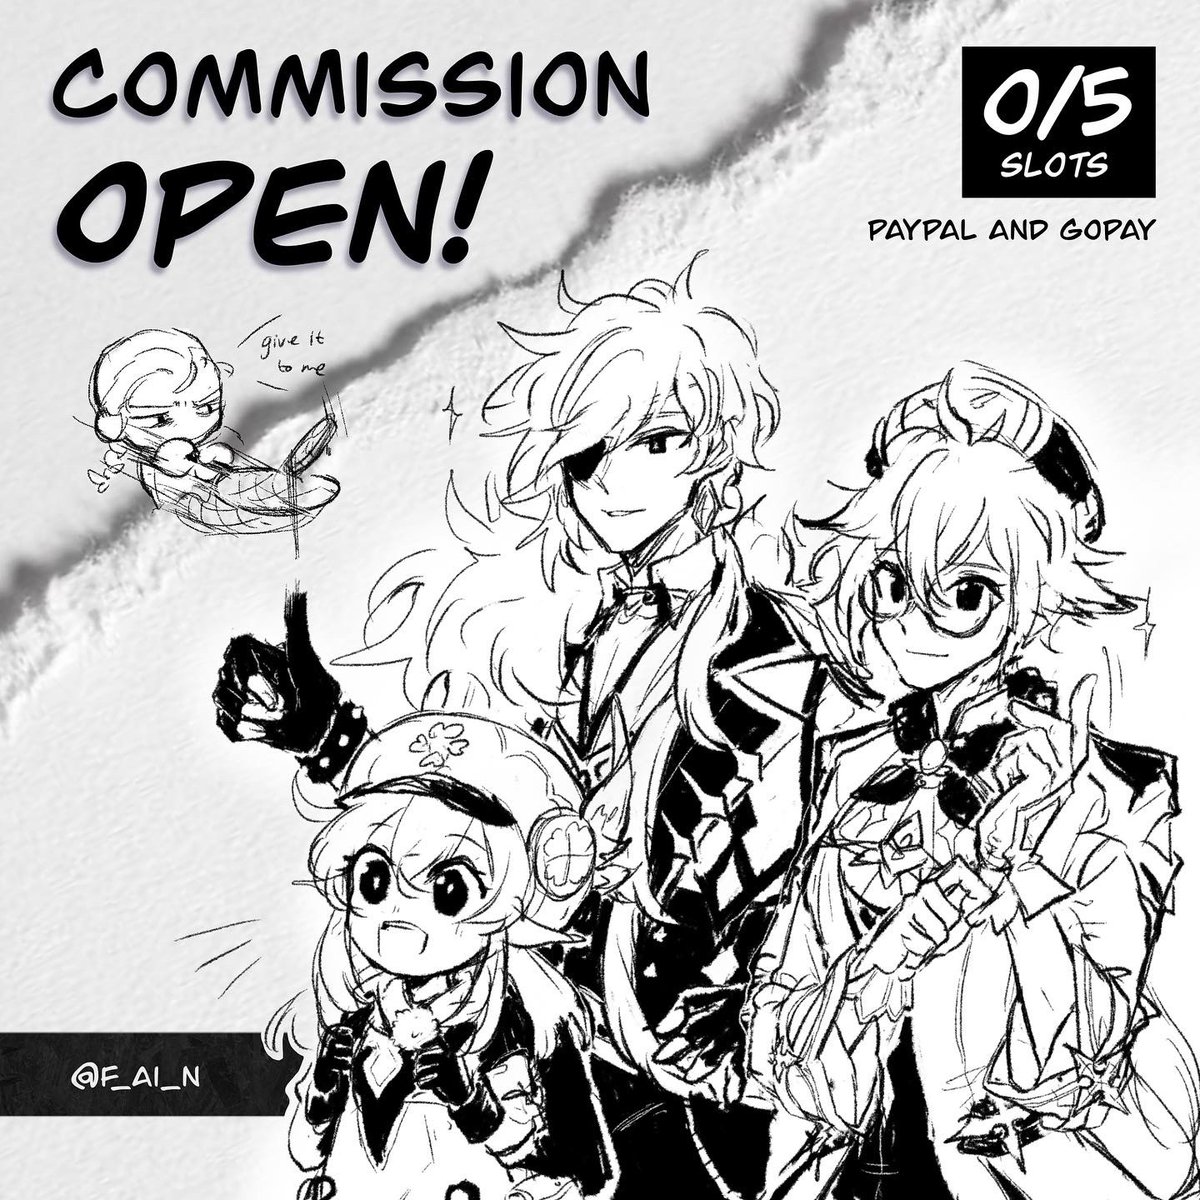 Commission open for limited slot! If you have any questions, you may comment down below!

To order, please fill out this form:
https://t.co/JhAVTgEKw6 